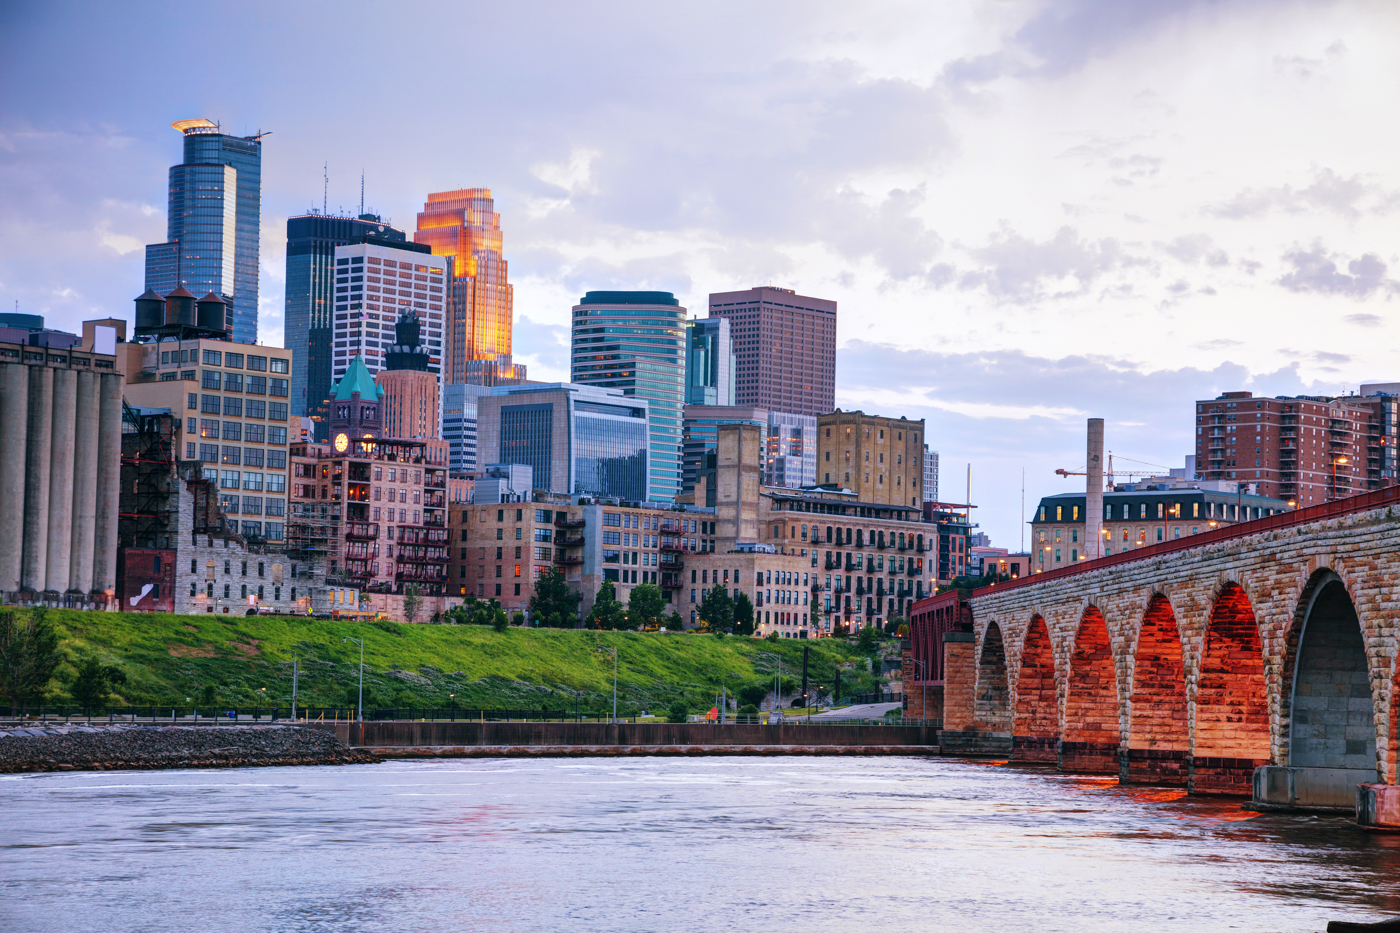 23 THINGS TO DO IN MINNEAPOLIS YOU CAN'T MISS